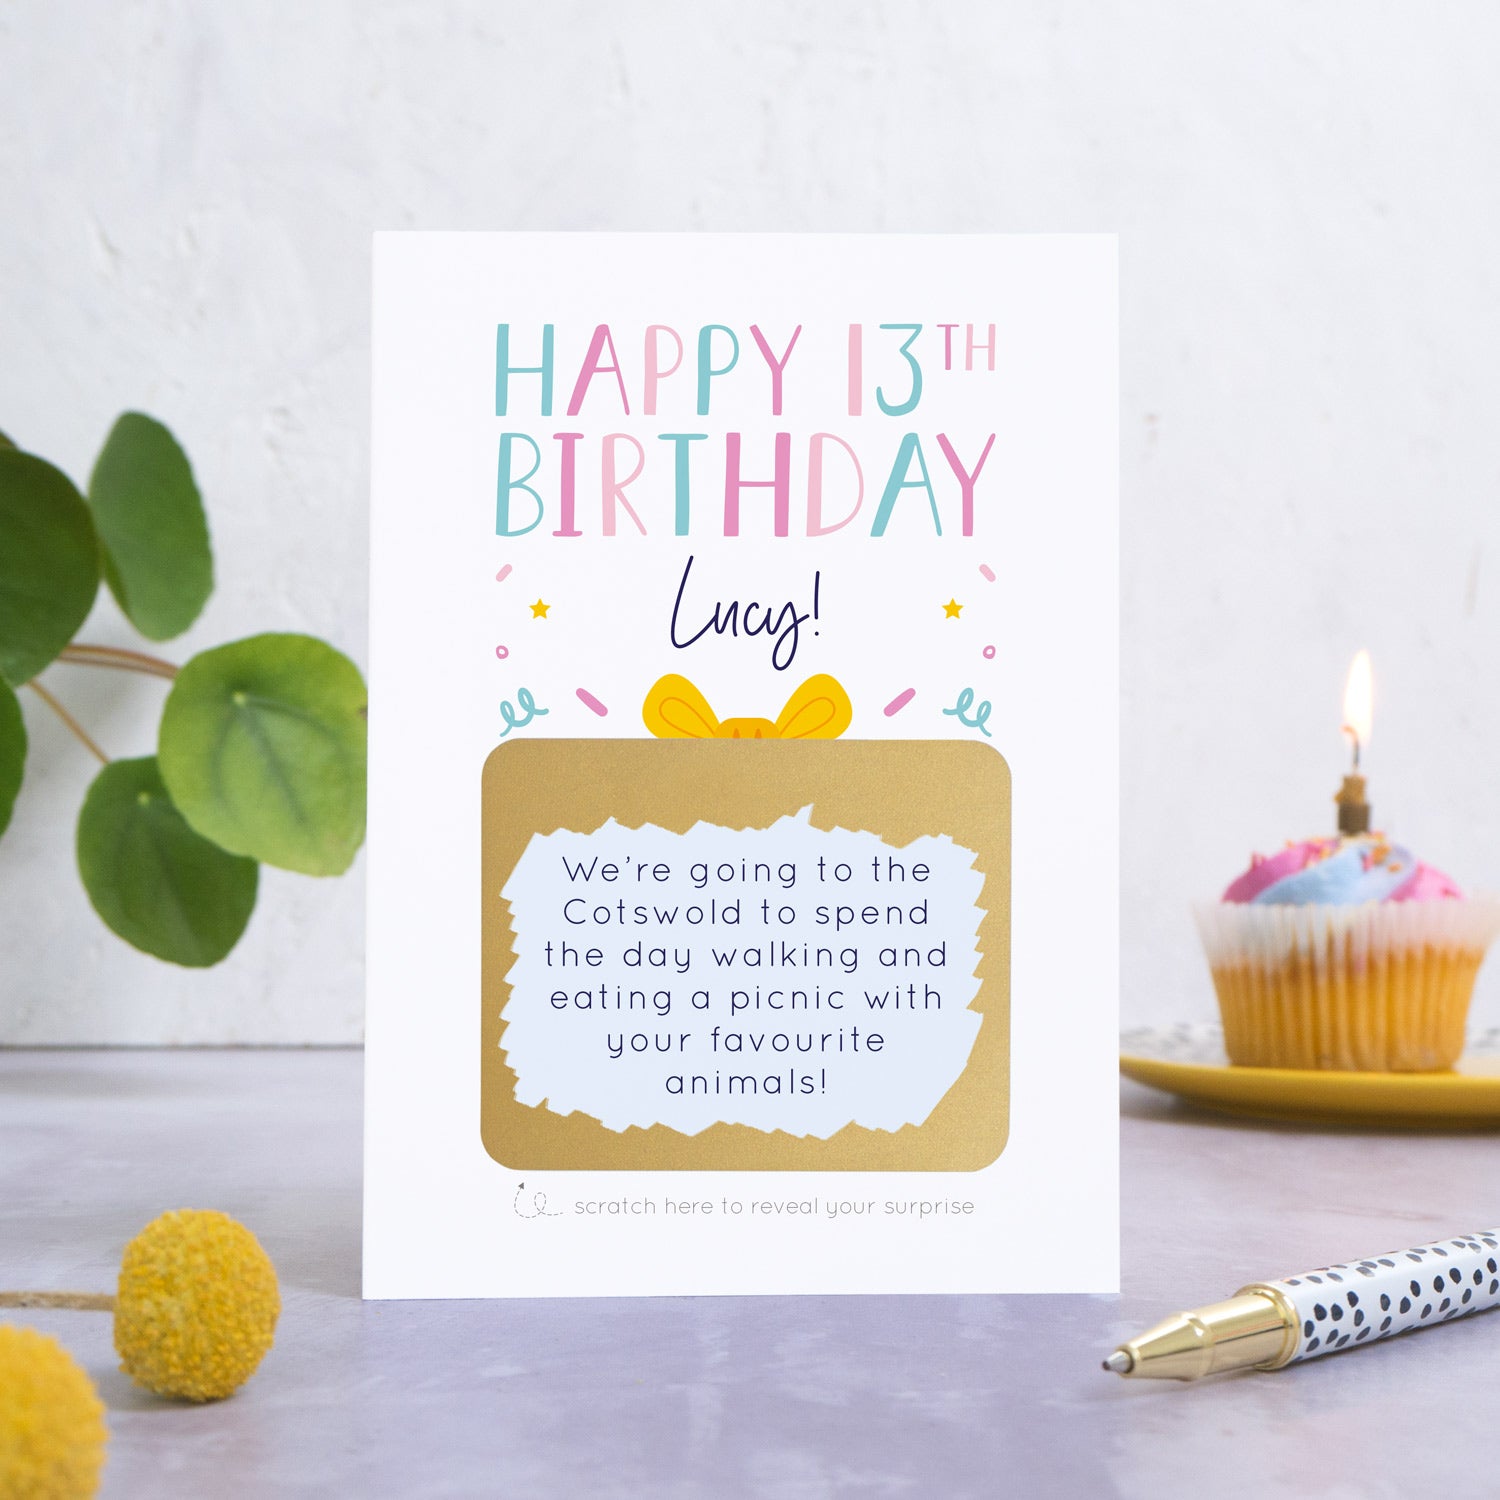 A personalised happy 13th birthday scratch card in pink that has been photographed on a white and grey background. There is foliage and yellow flowers on the left and a cupcake and a pen to the right. The card features the recipients name and a scratch panel that has been scratched off revealing a personalised message.